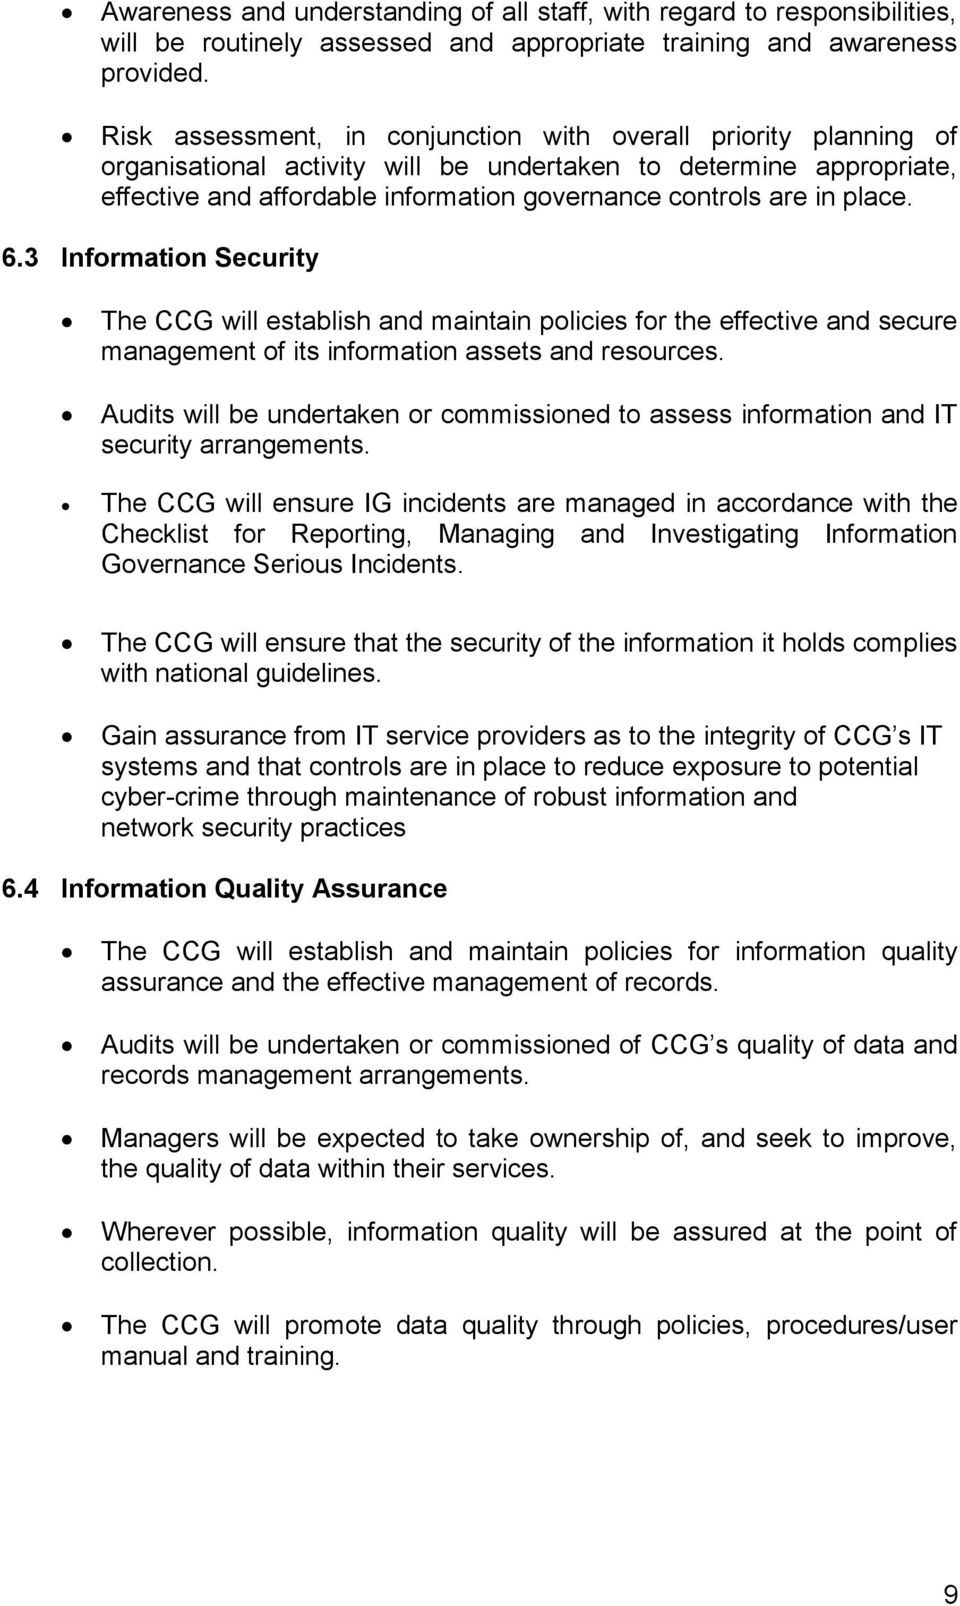 place. 6.3 Information Security The CCG will establish and maintain policies for the effective and secure management of its information assets and resources.